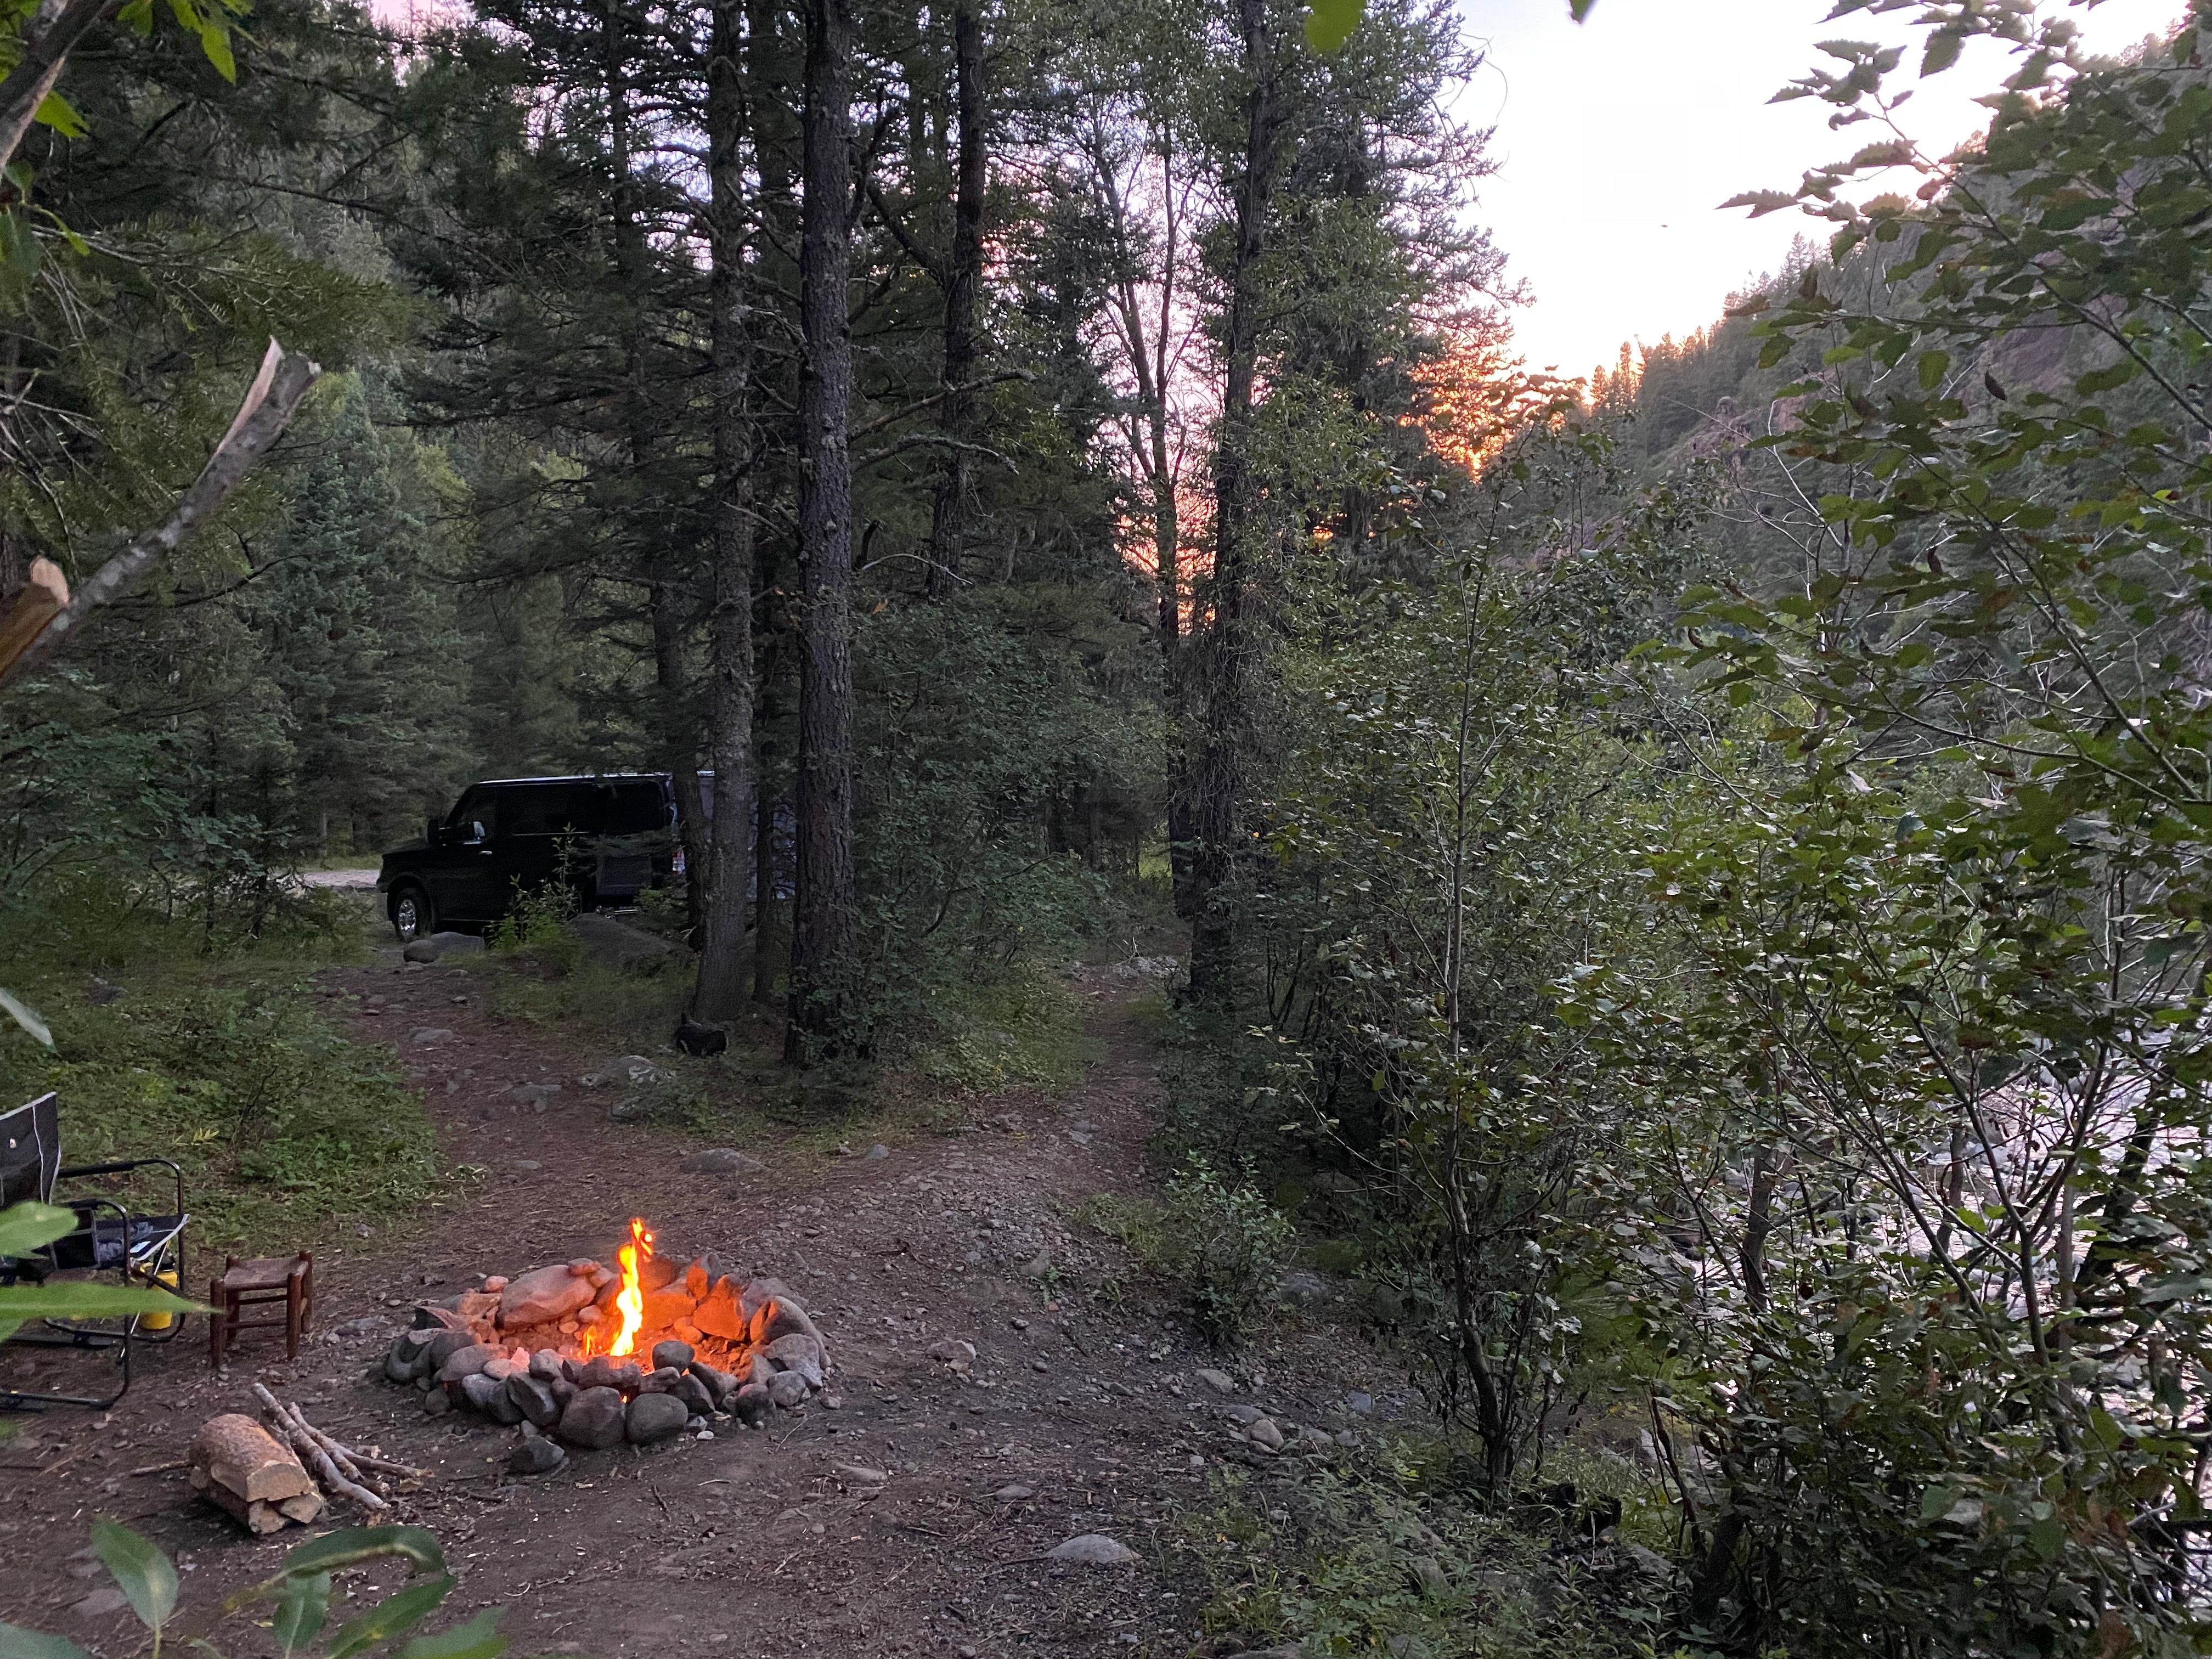 Camper submitted image from East Fork San Juan River, USFS Road 667 - Dispersed Camping - 5